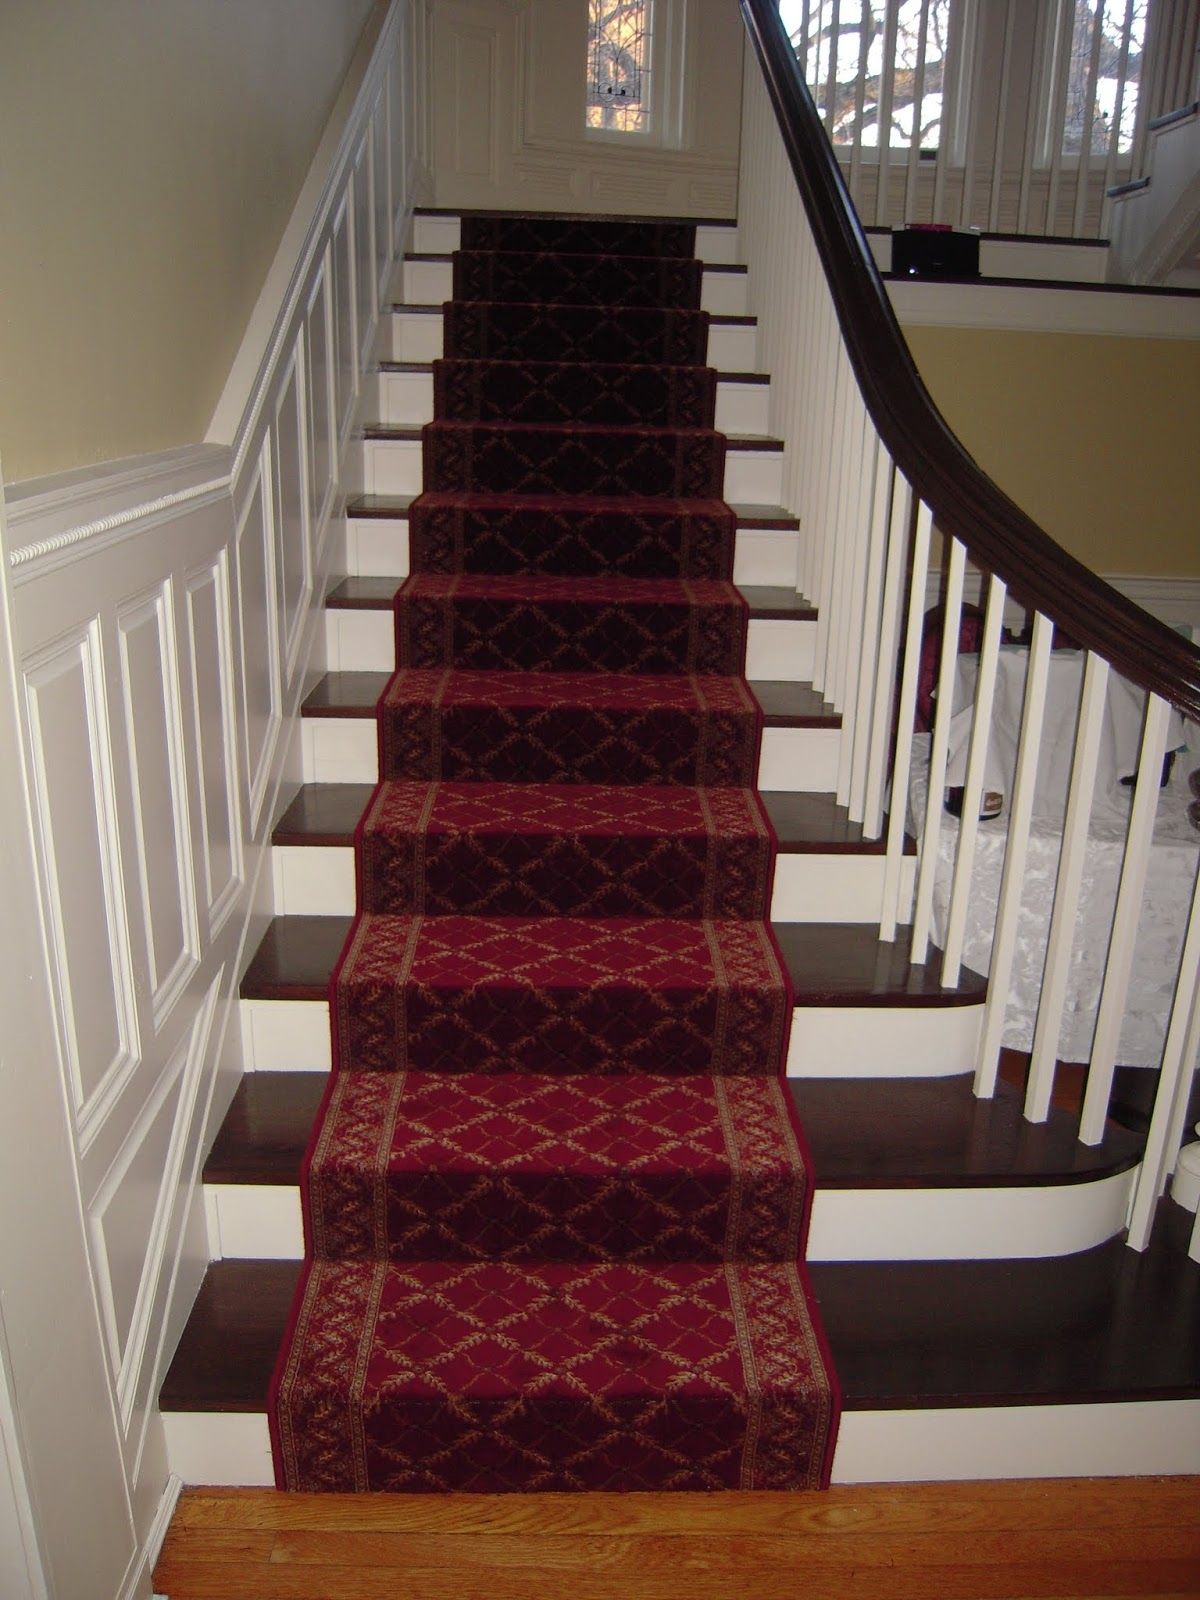 Carpet Runner For Stairs For Carpet Runners For Stairs And Hallways 